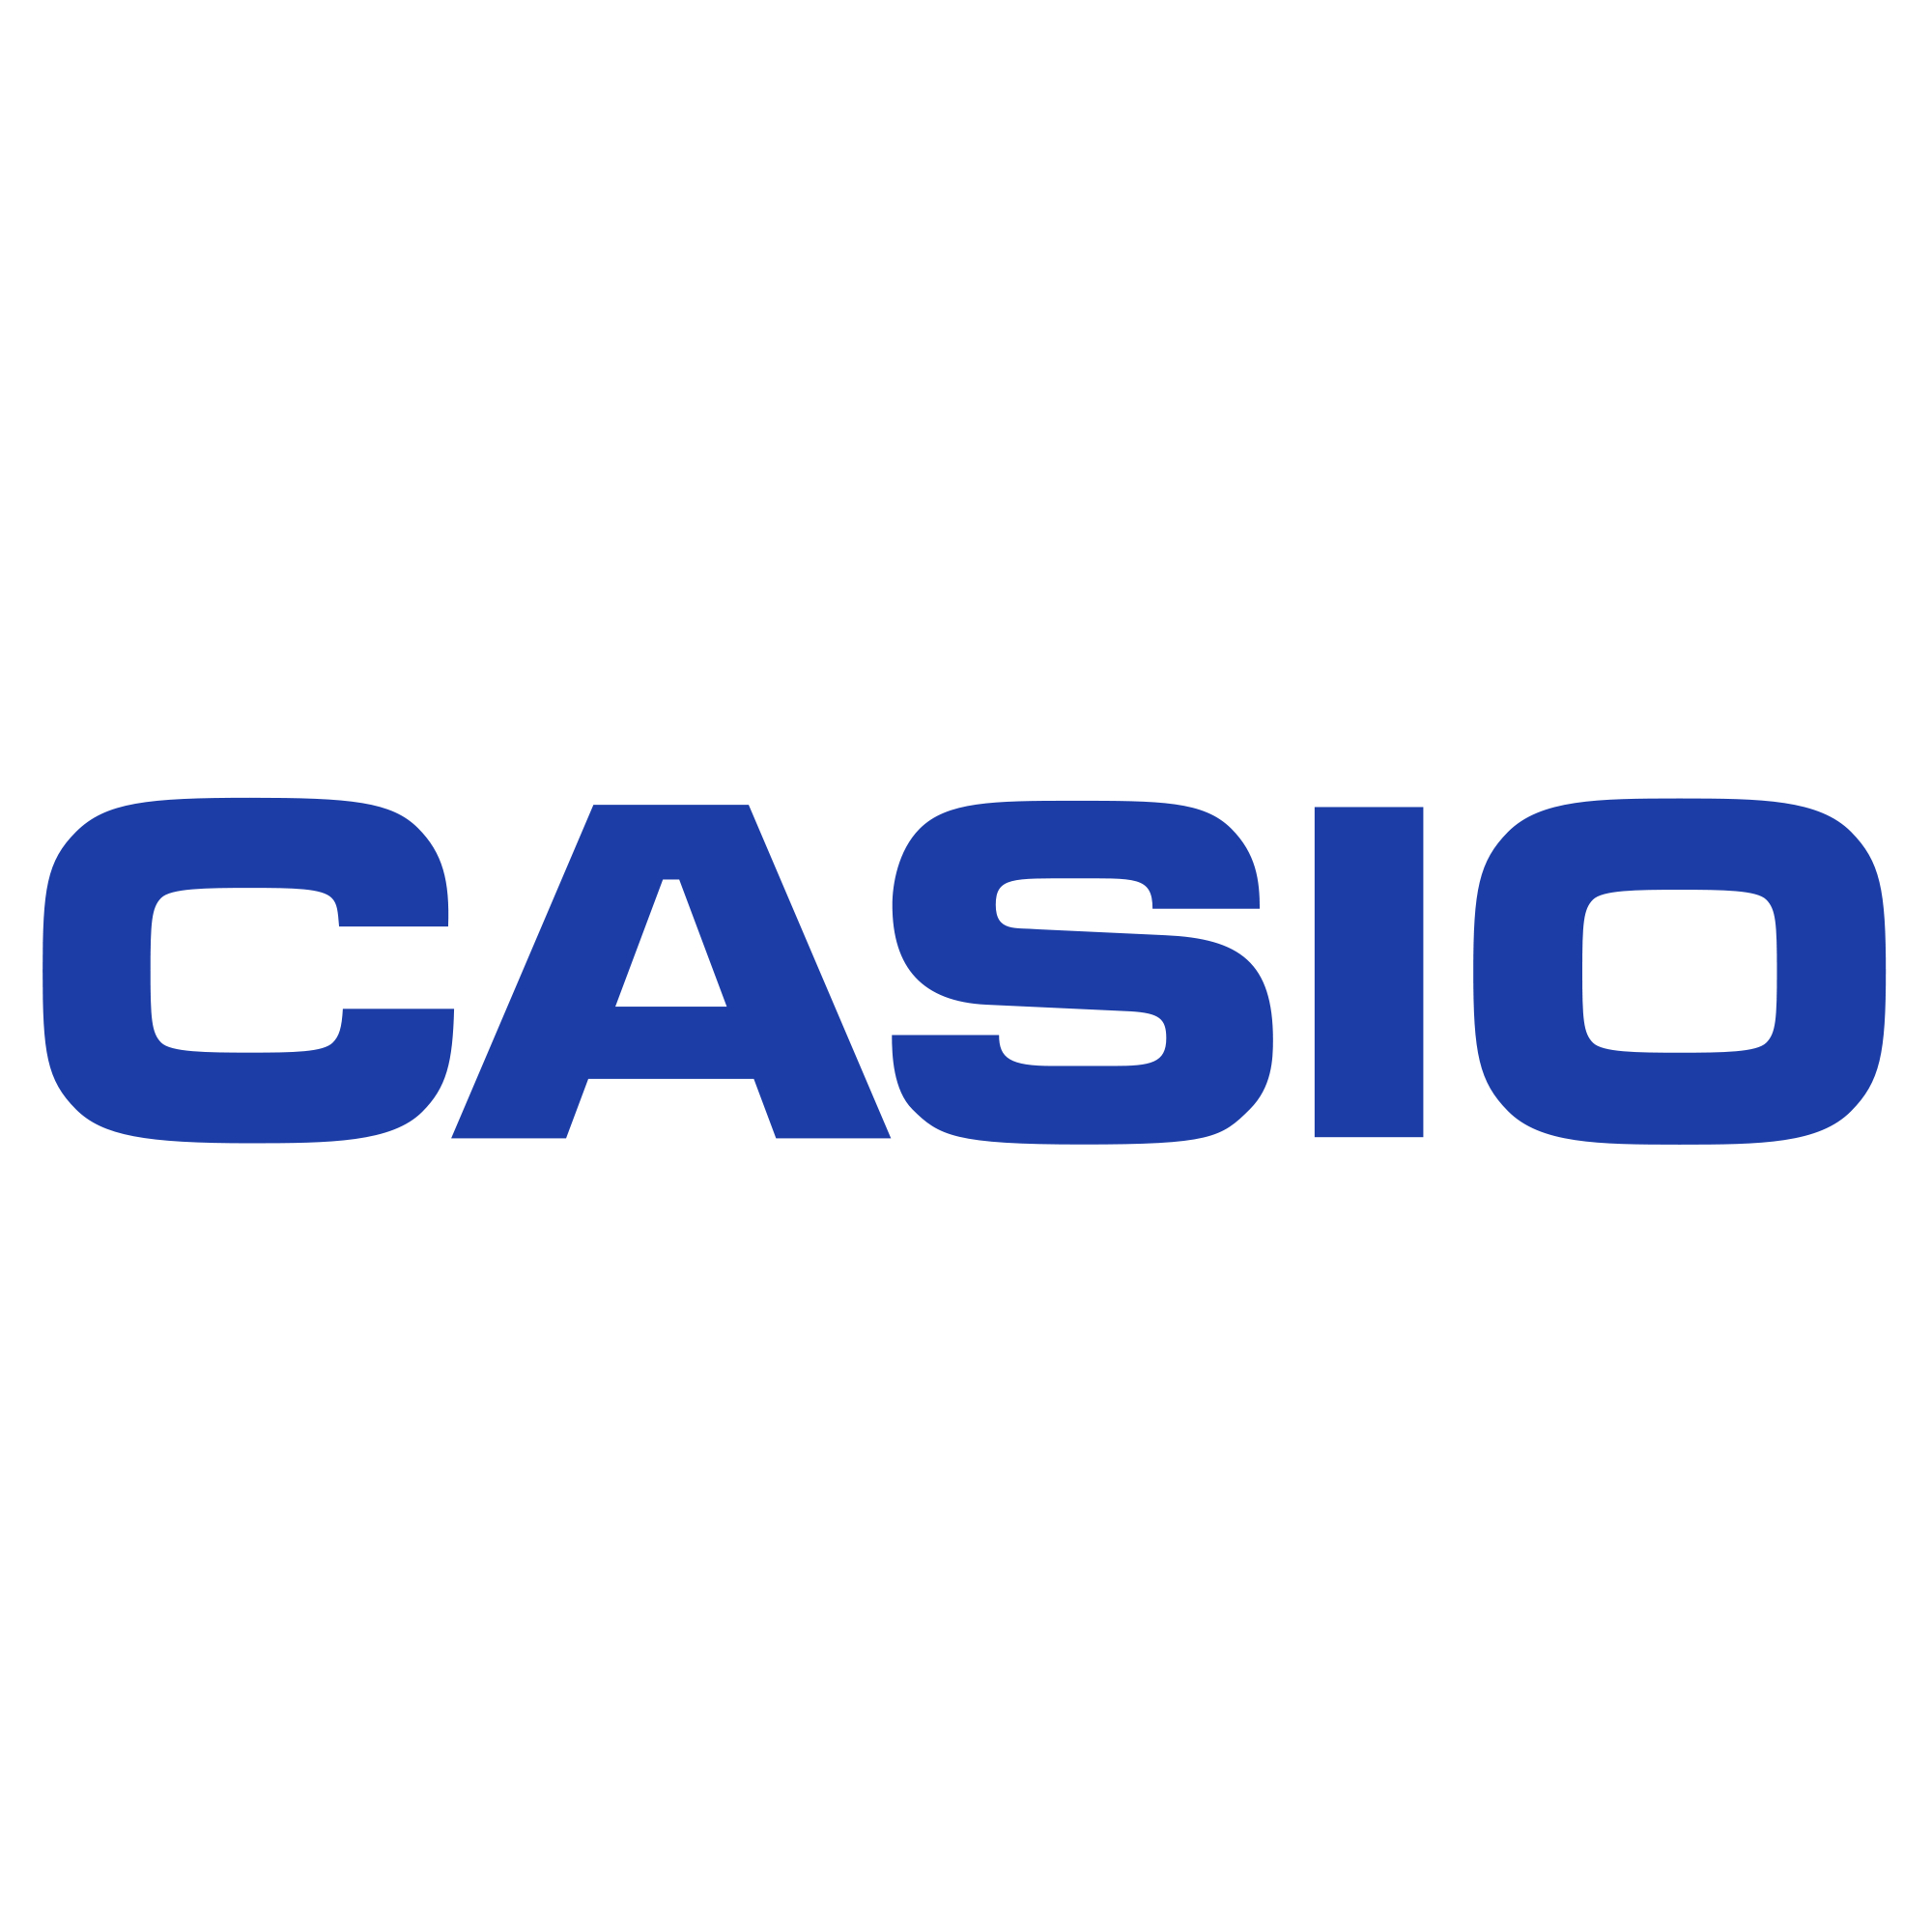 CASIO MIDDLE EAST